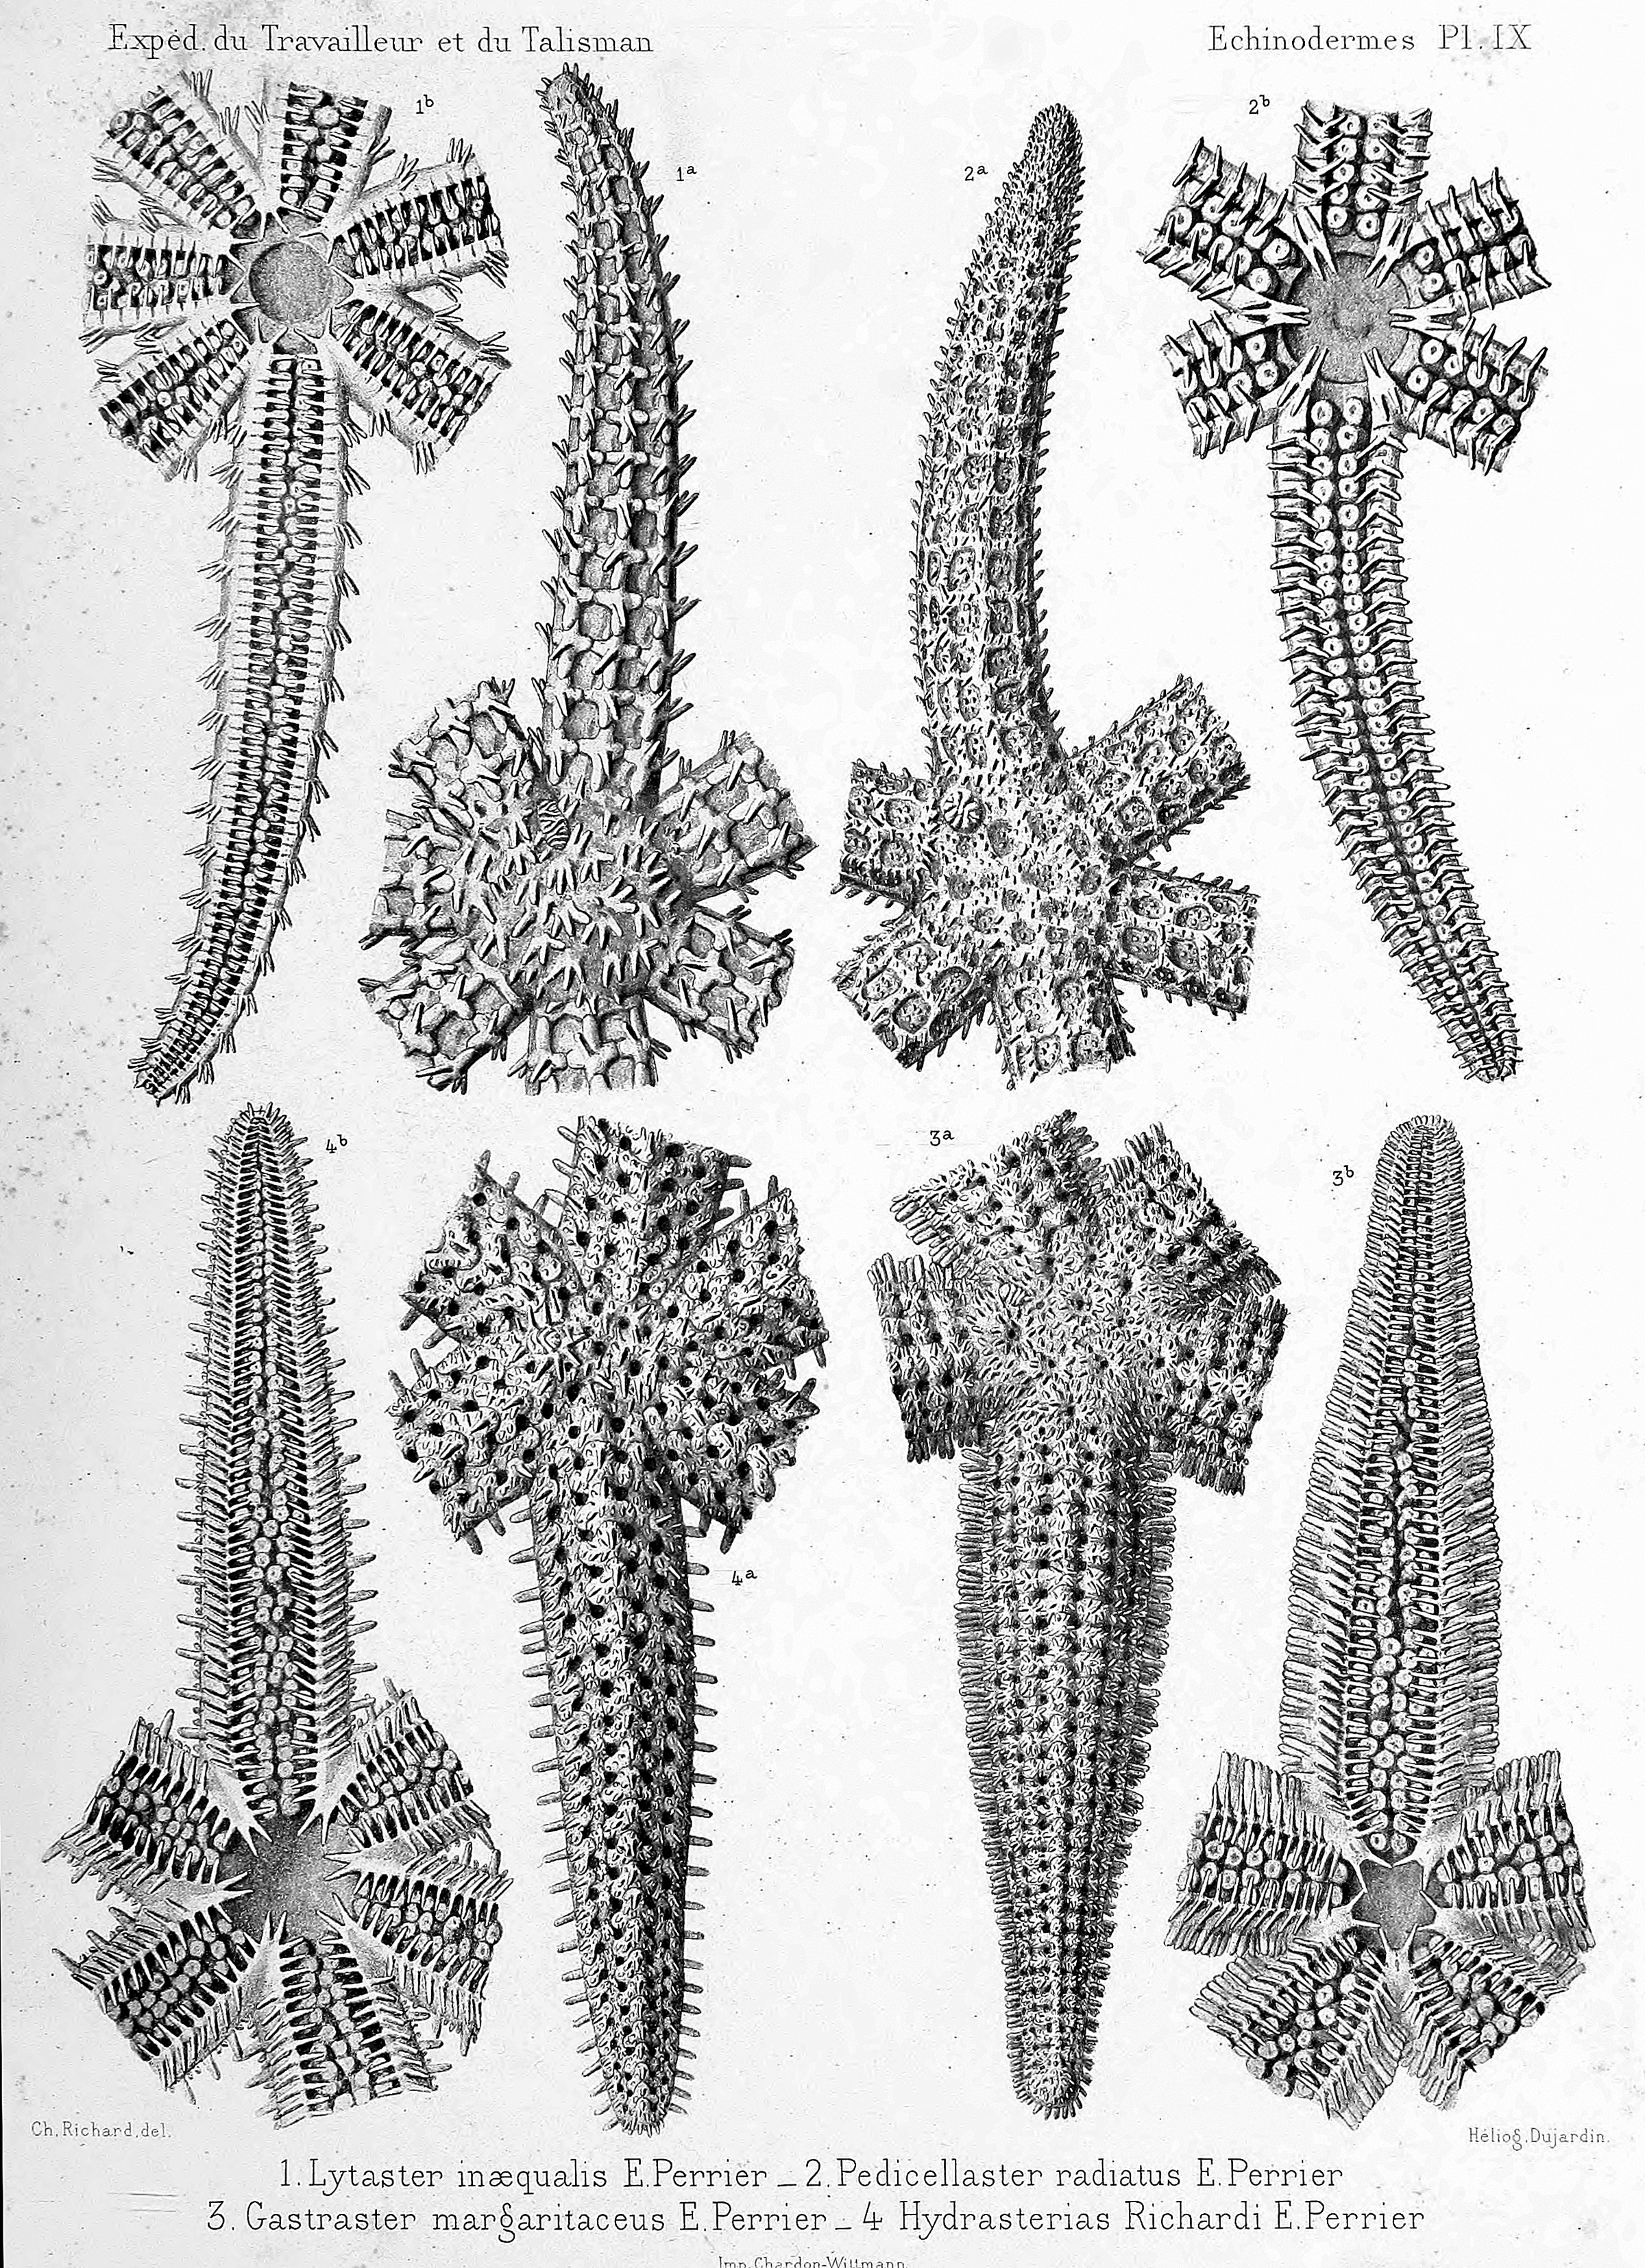 From Perrier's monograph on the echinoderms of the expeditions